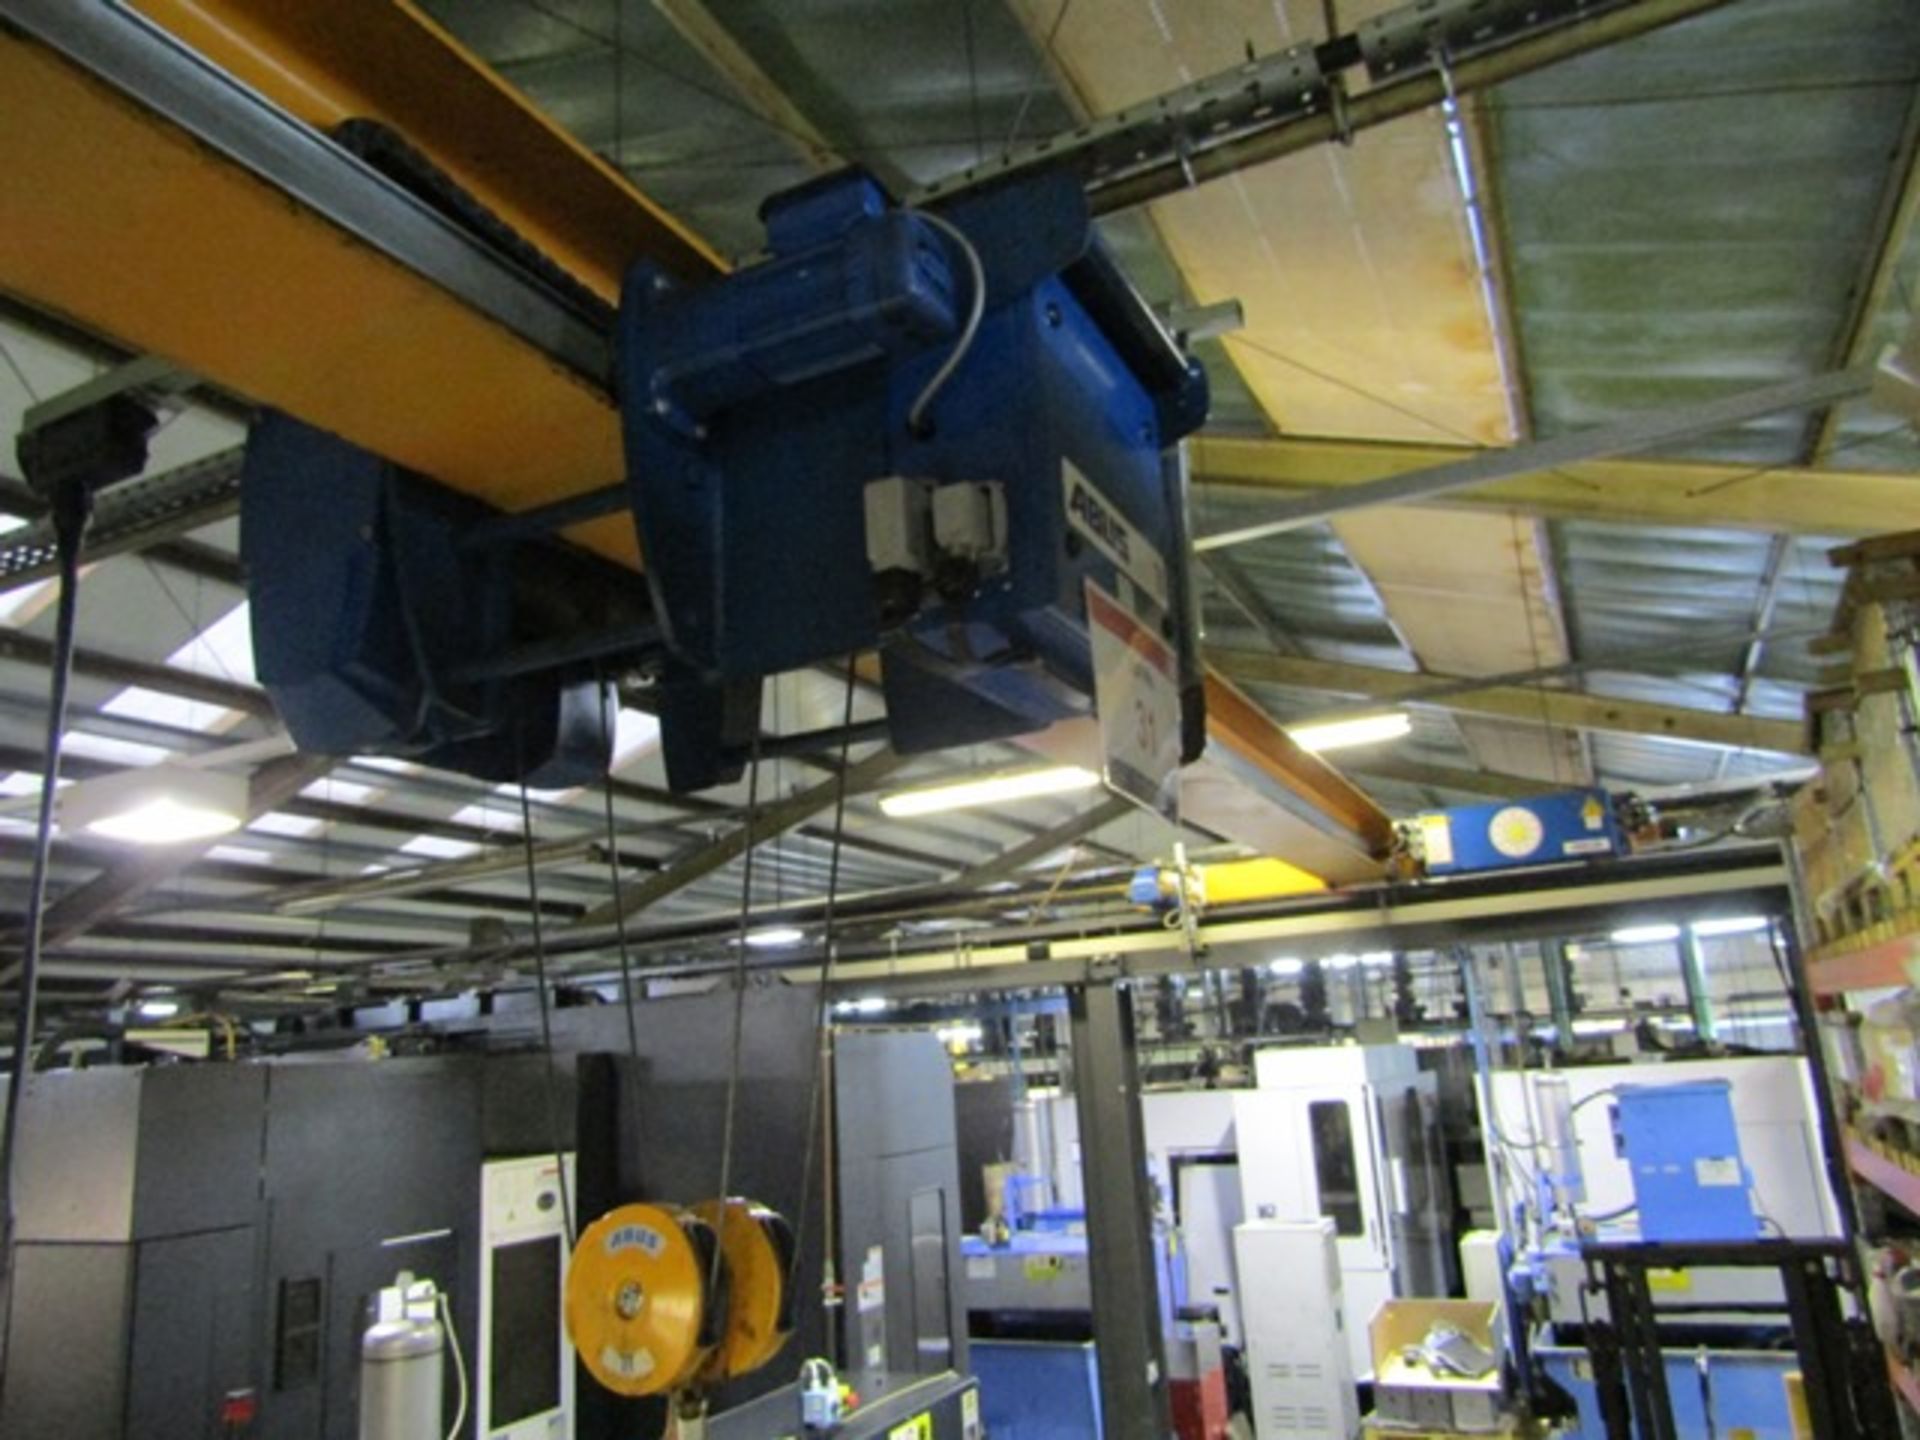 Abus 1 ton overhead travelling electric gantry crane, serial no: 16258516-1, approx 5.5m span x - Image 2 of 9